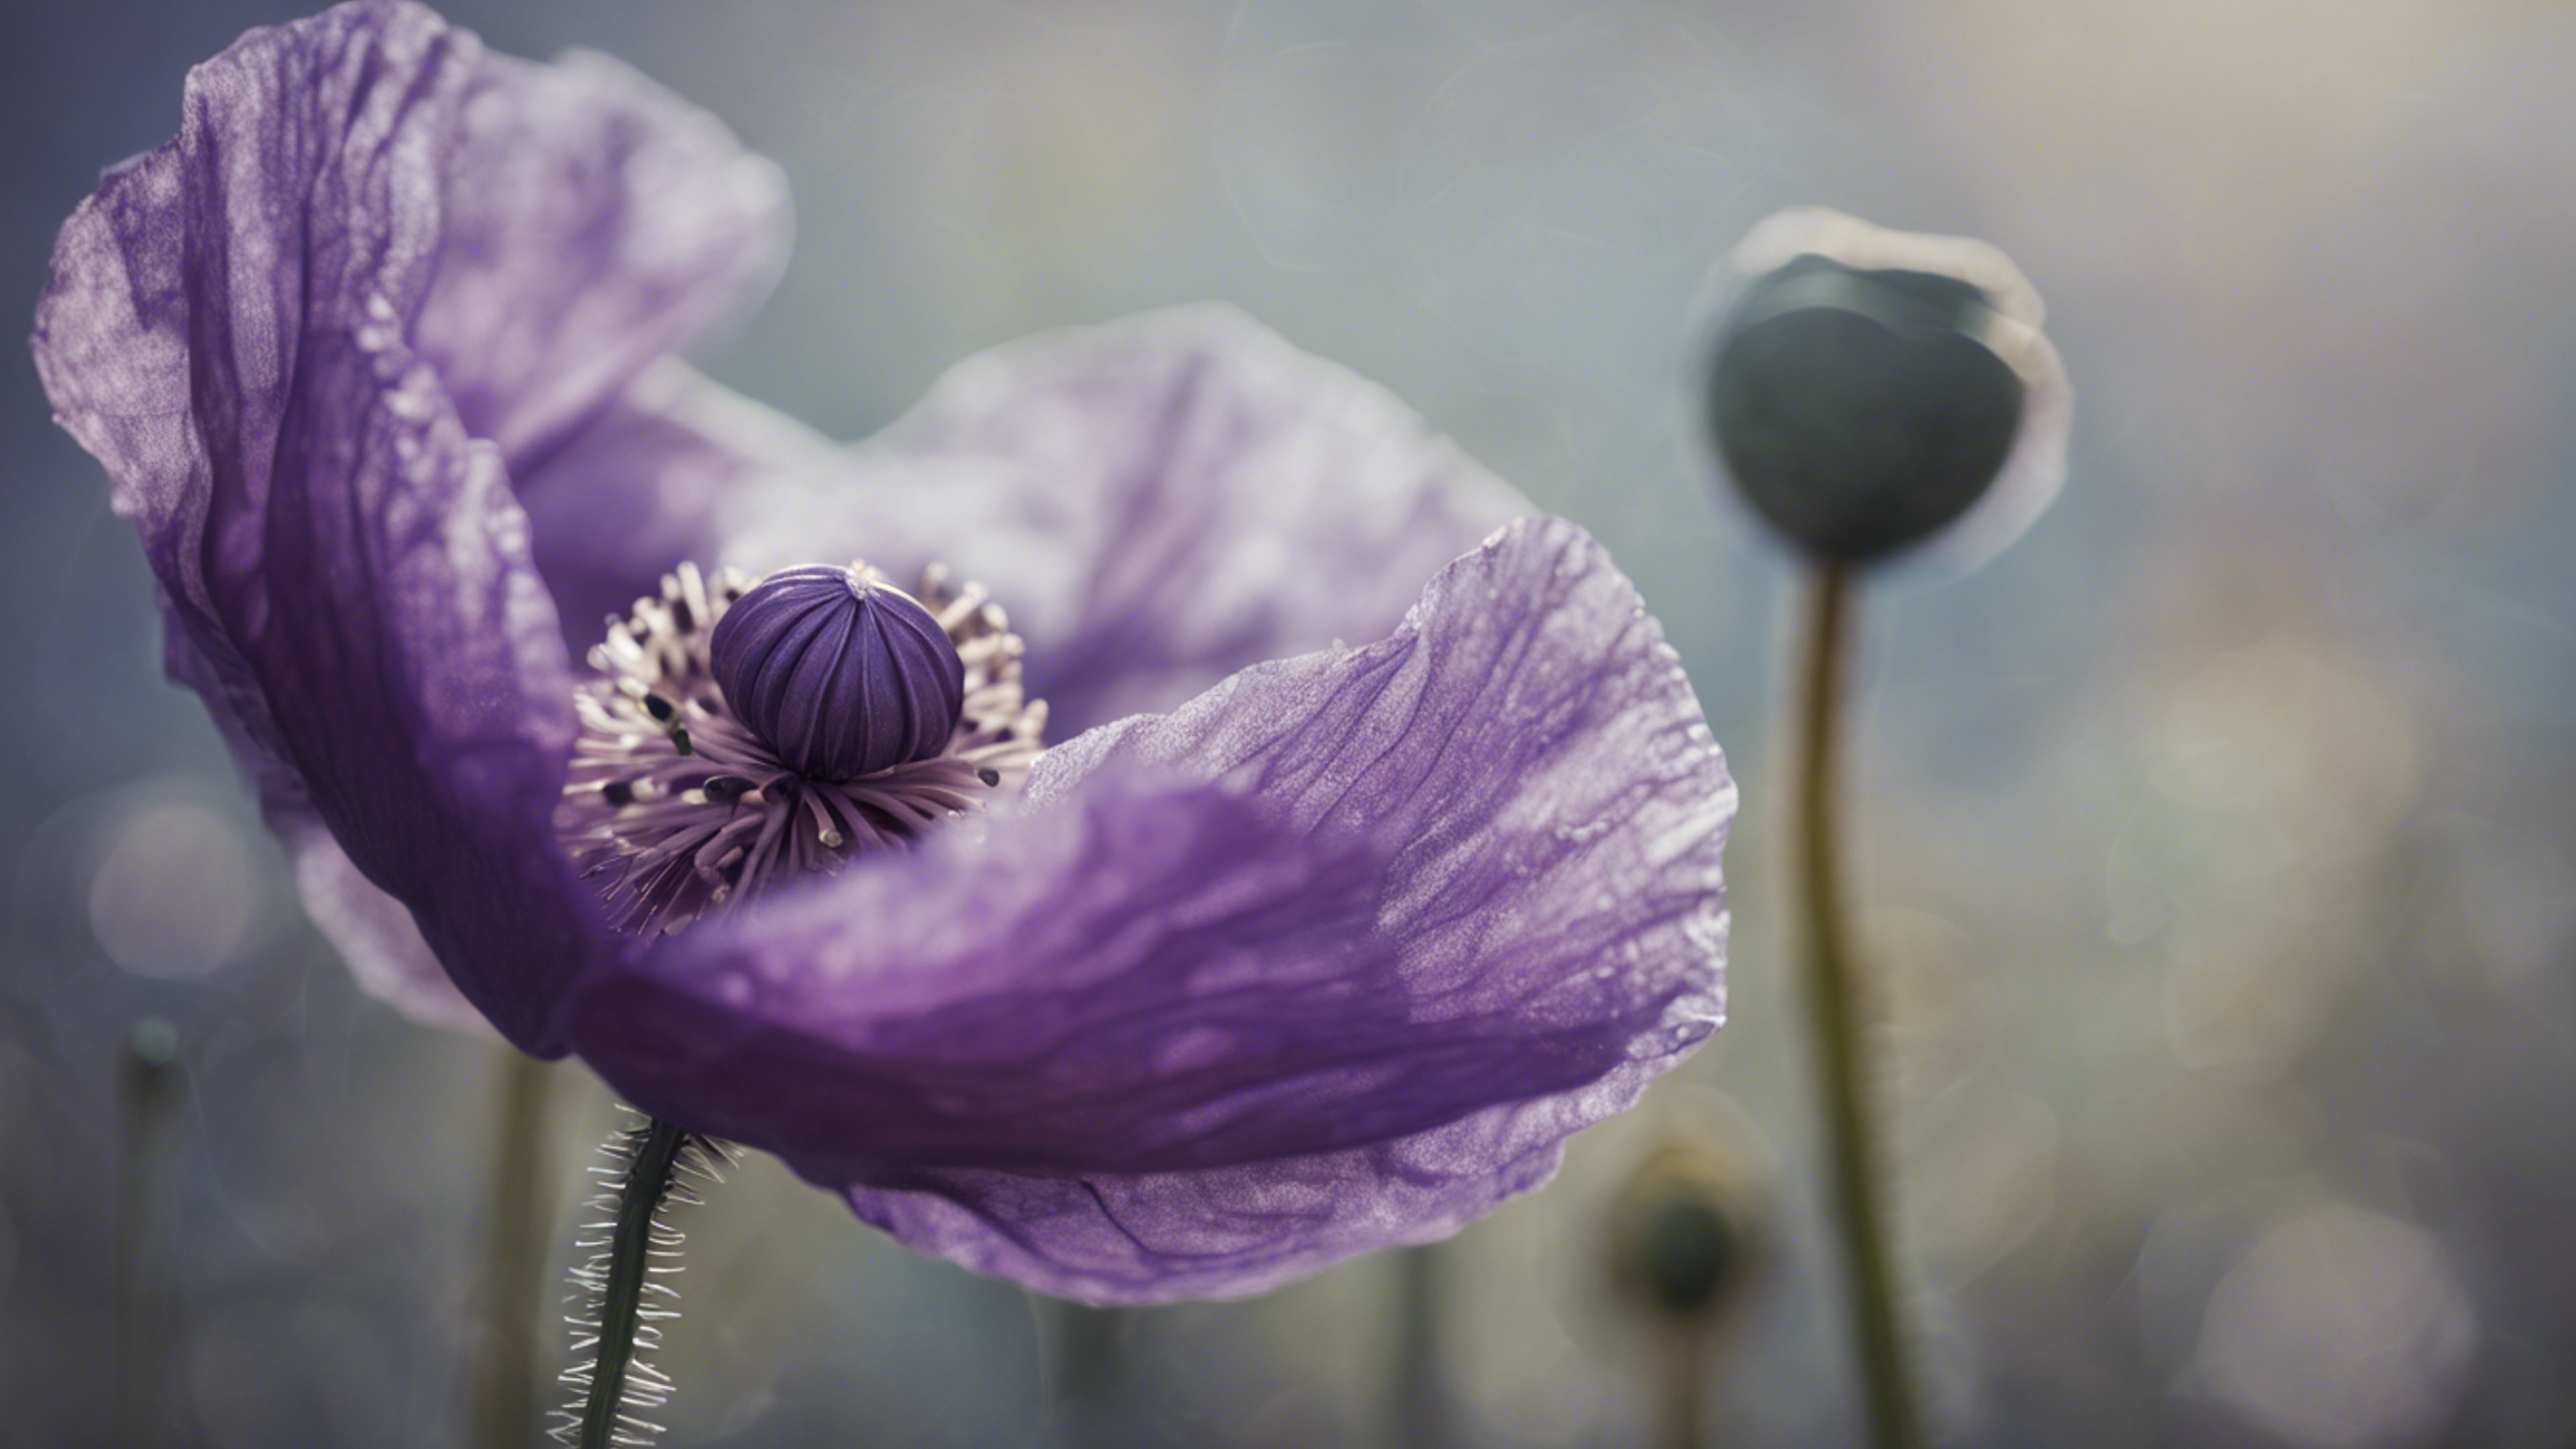 A close-up of a purple poppy with intricate details on a textured canvas. Tapeta[f5d07fa5408f4773ae7b]